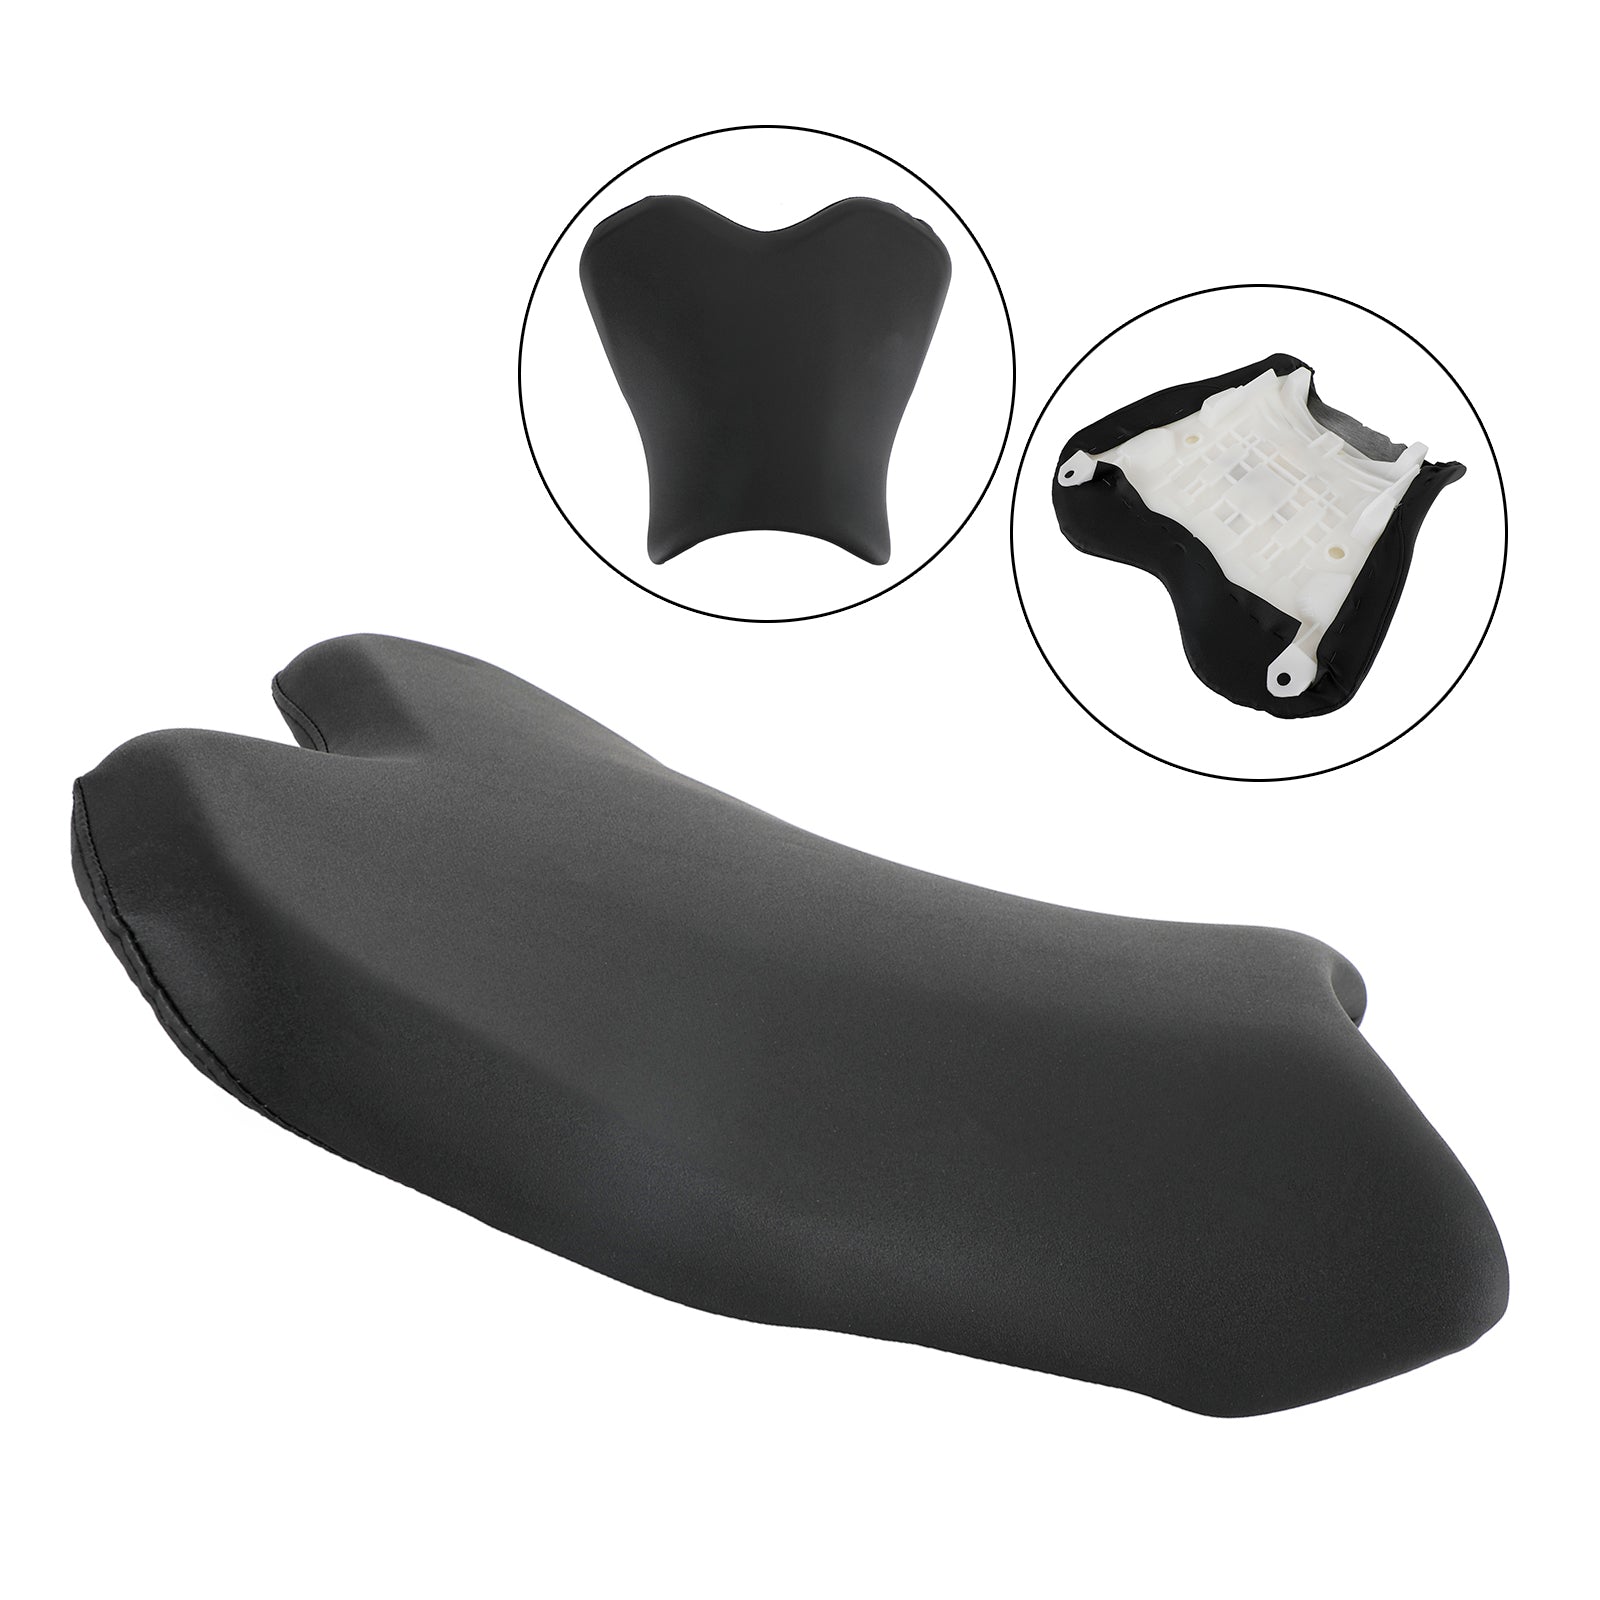 Rider Passenger Seat Front Rear Cushion Fit For Yamaha Yzf-R1 Yzf R1 15-19